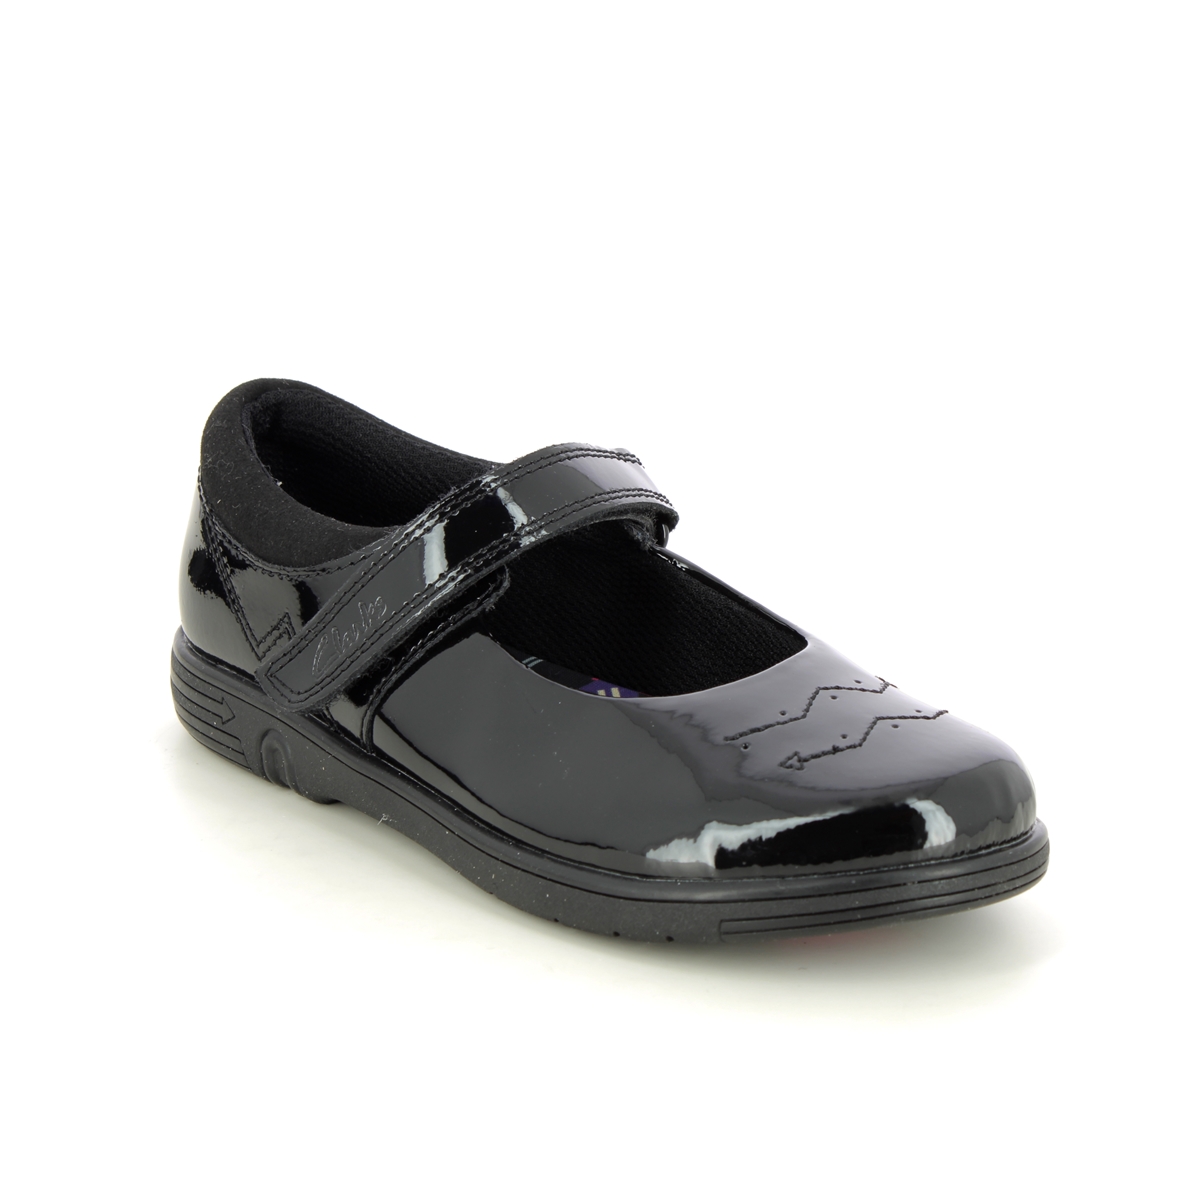 Clarks Jazzy Jig K Mary Jane Black Patent Kids Girls School Shoes 753086F In Size 12.5 In Plain Black Patent F Width Fitting Regular Fit For School Fo